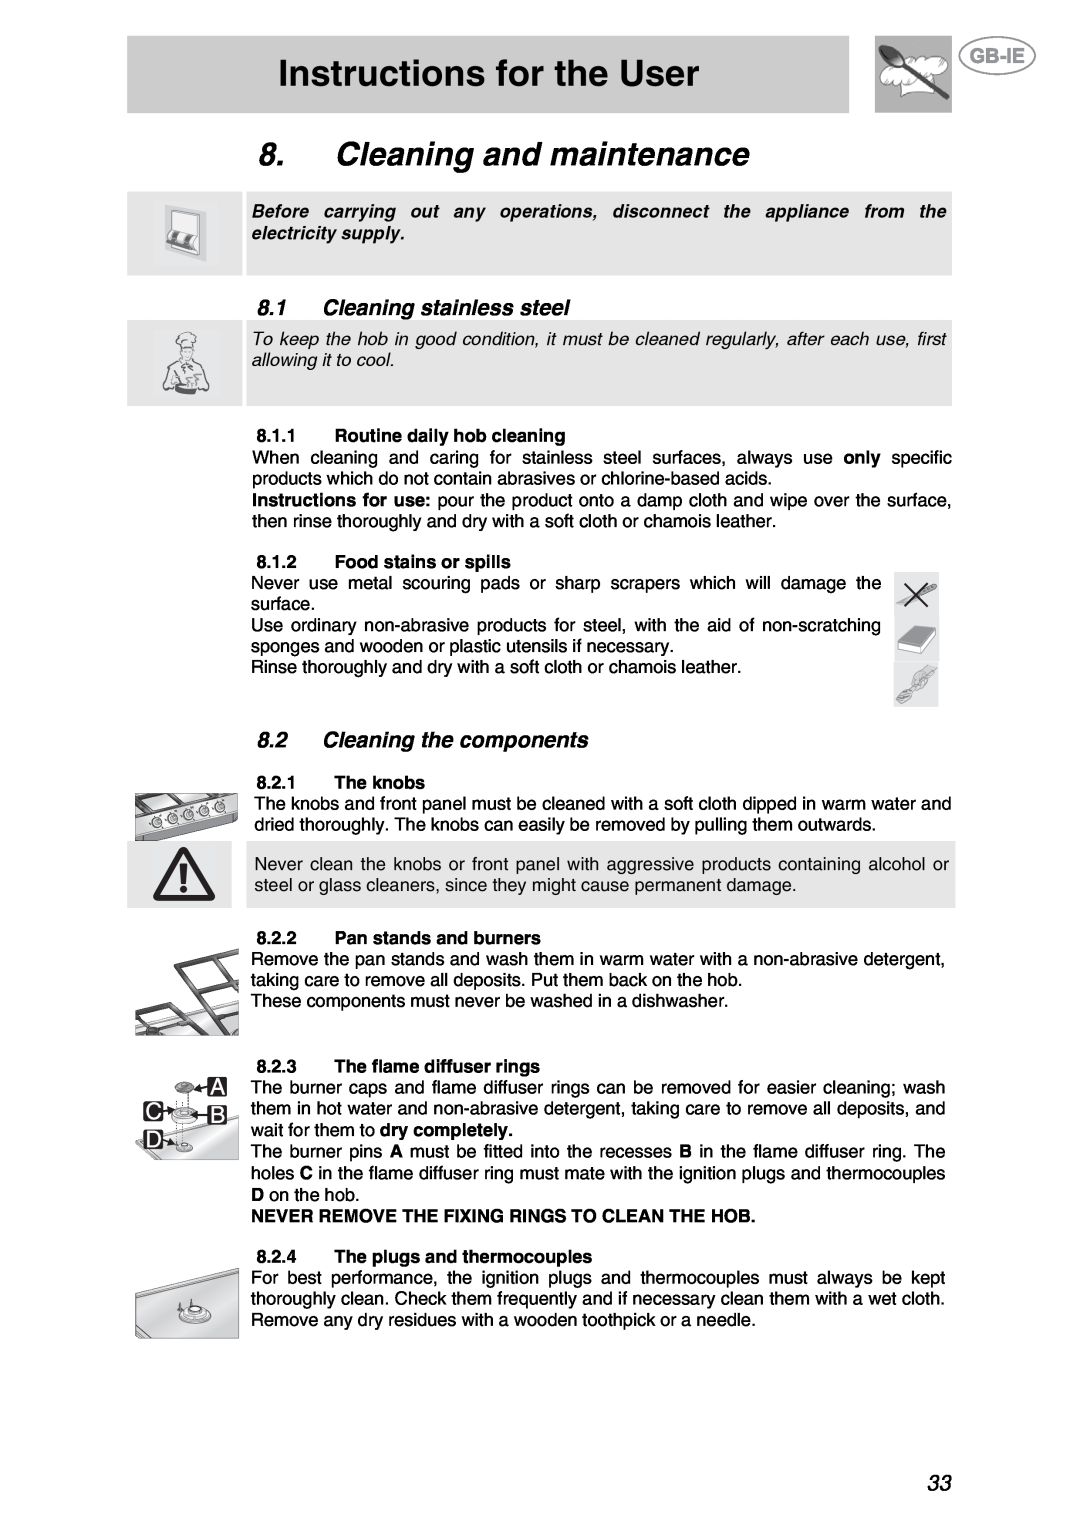 Smeg GKL64-3 Cleaning and maintenance, Instructions for the User, 8.1Cleaning stainless steel, 8.2Cleaning the components 